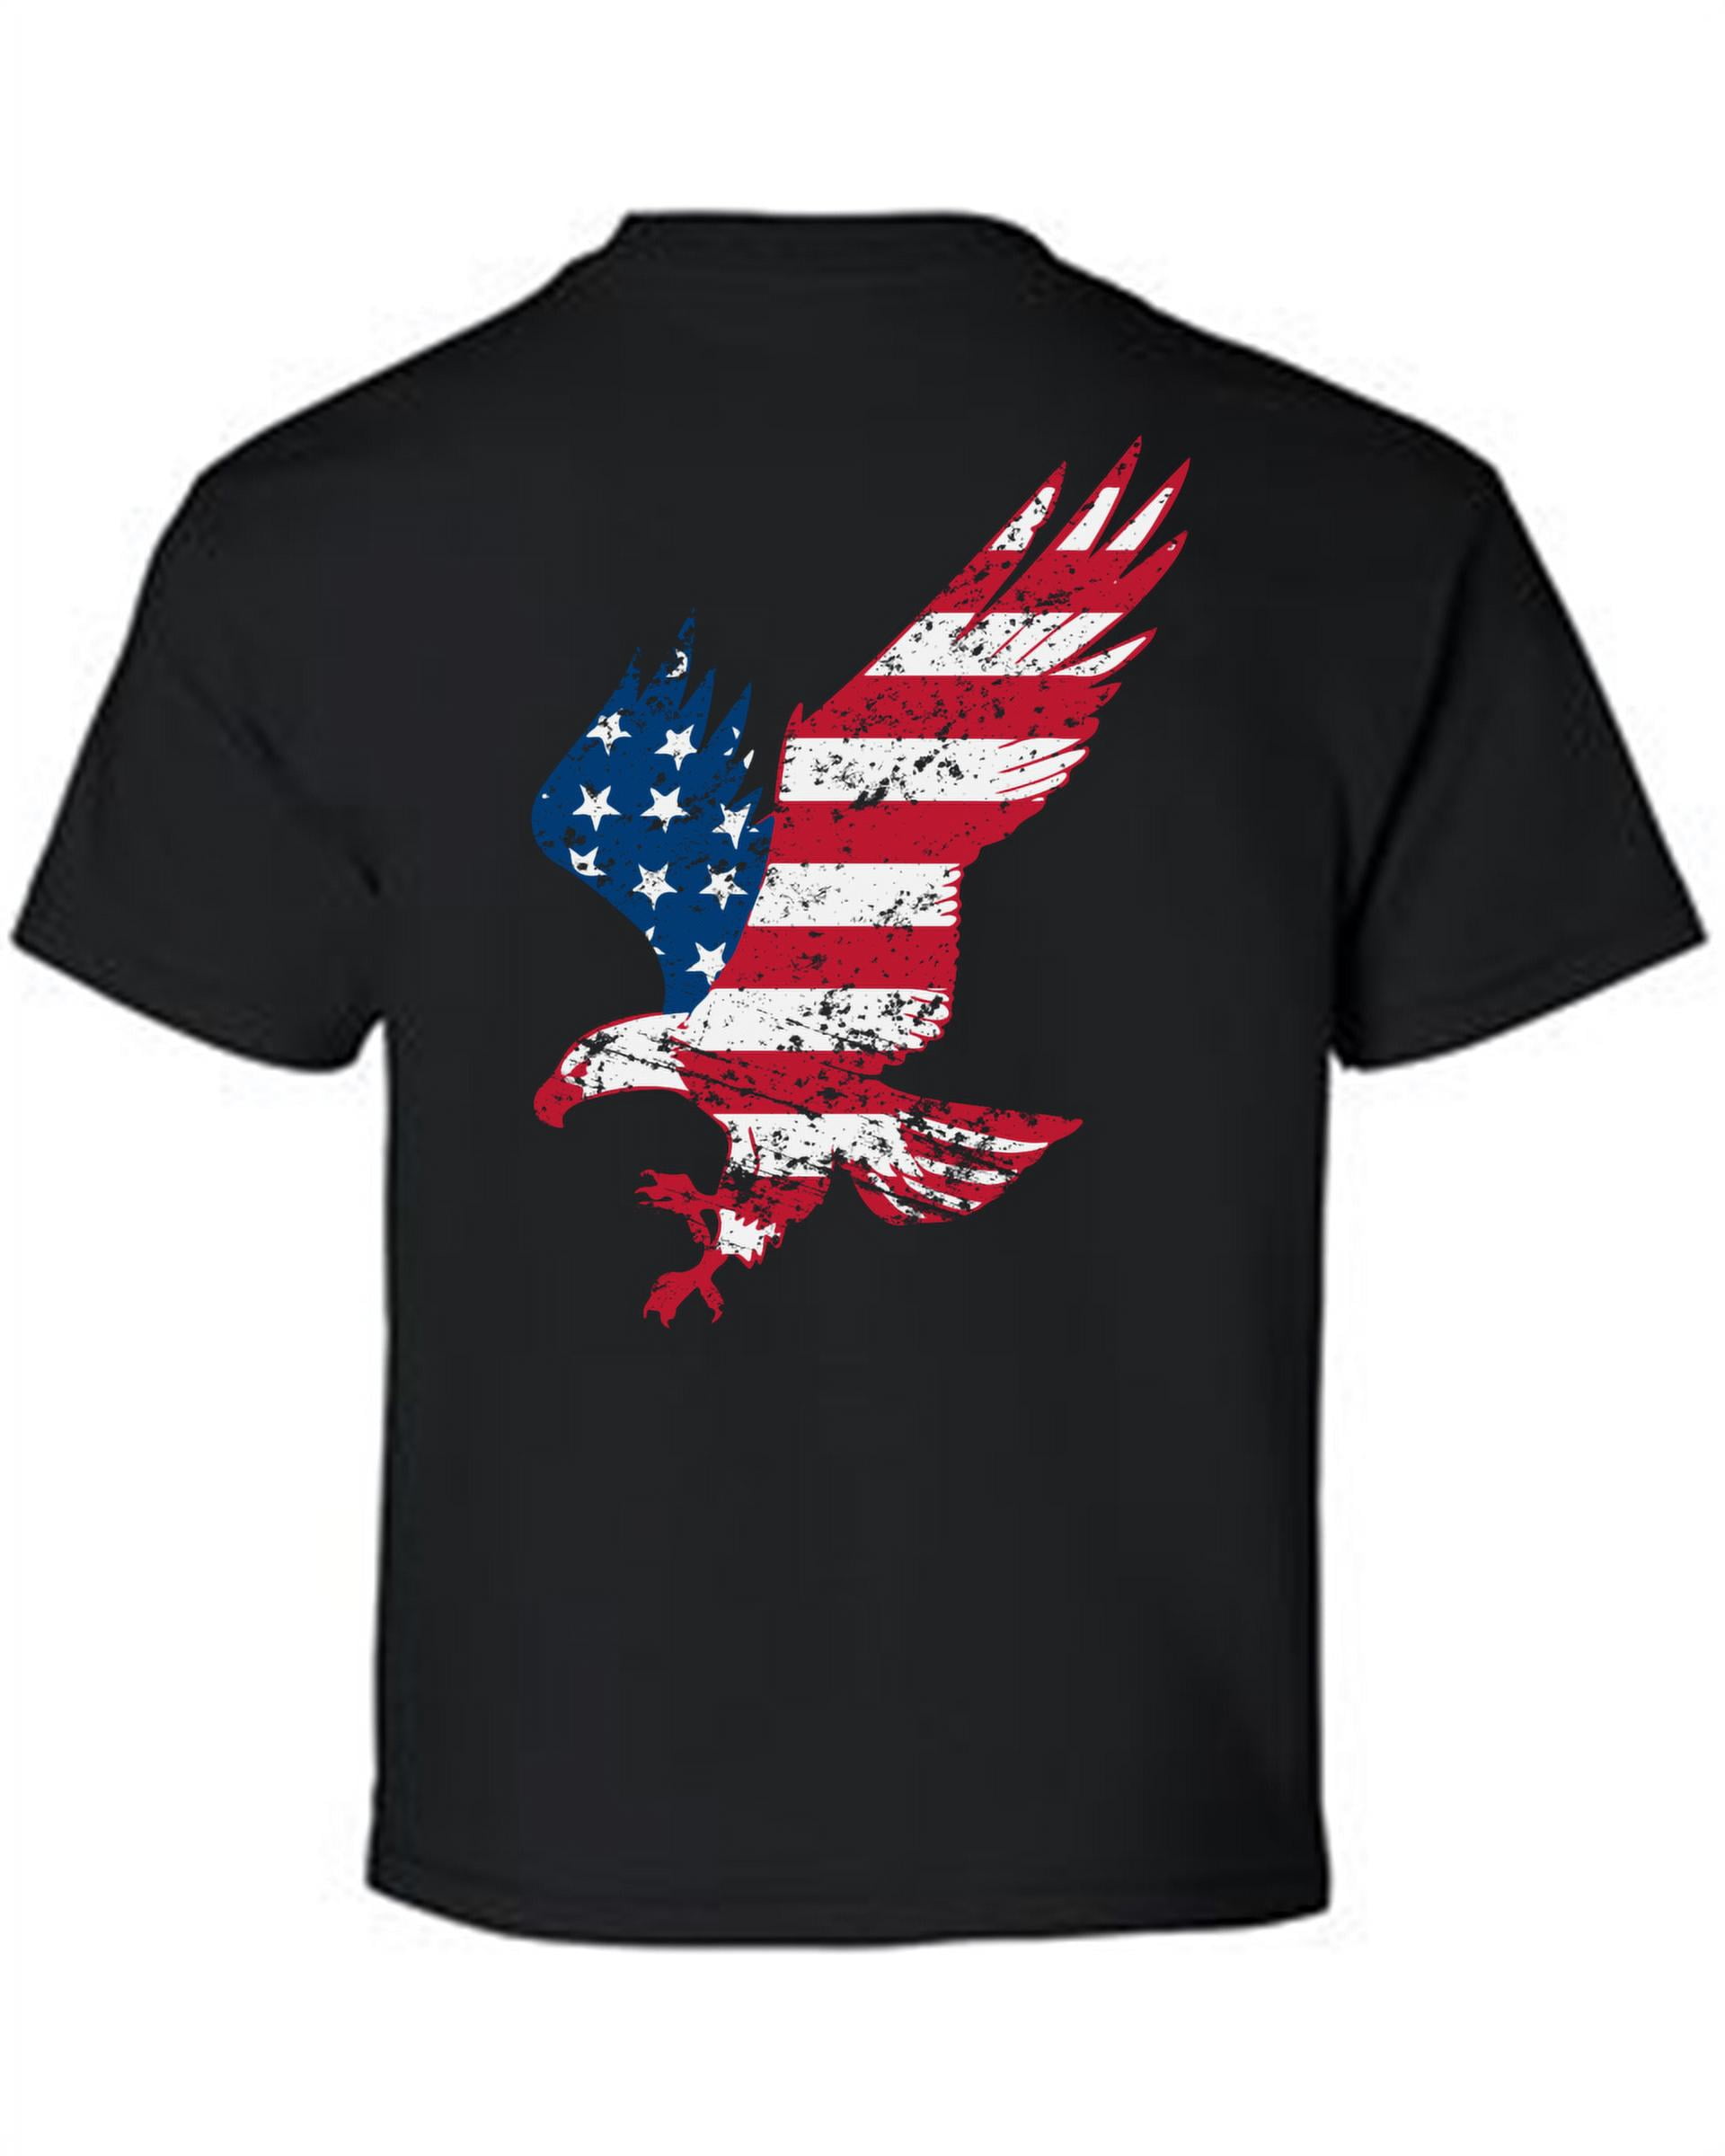 Awkward Styles American Eagle Youth Shirt Independence Day Pro America ...